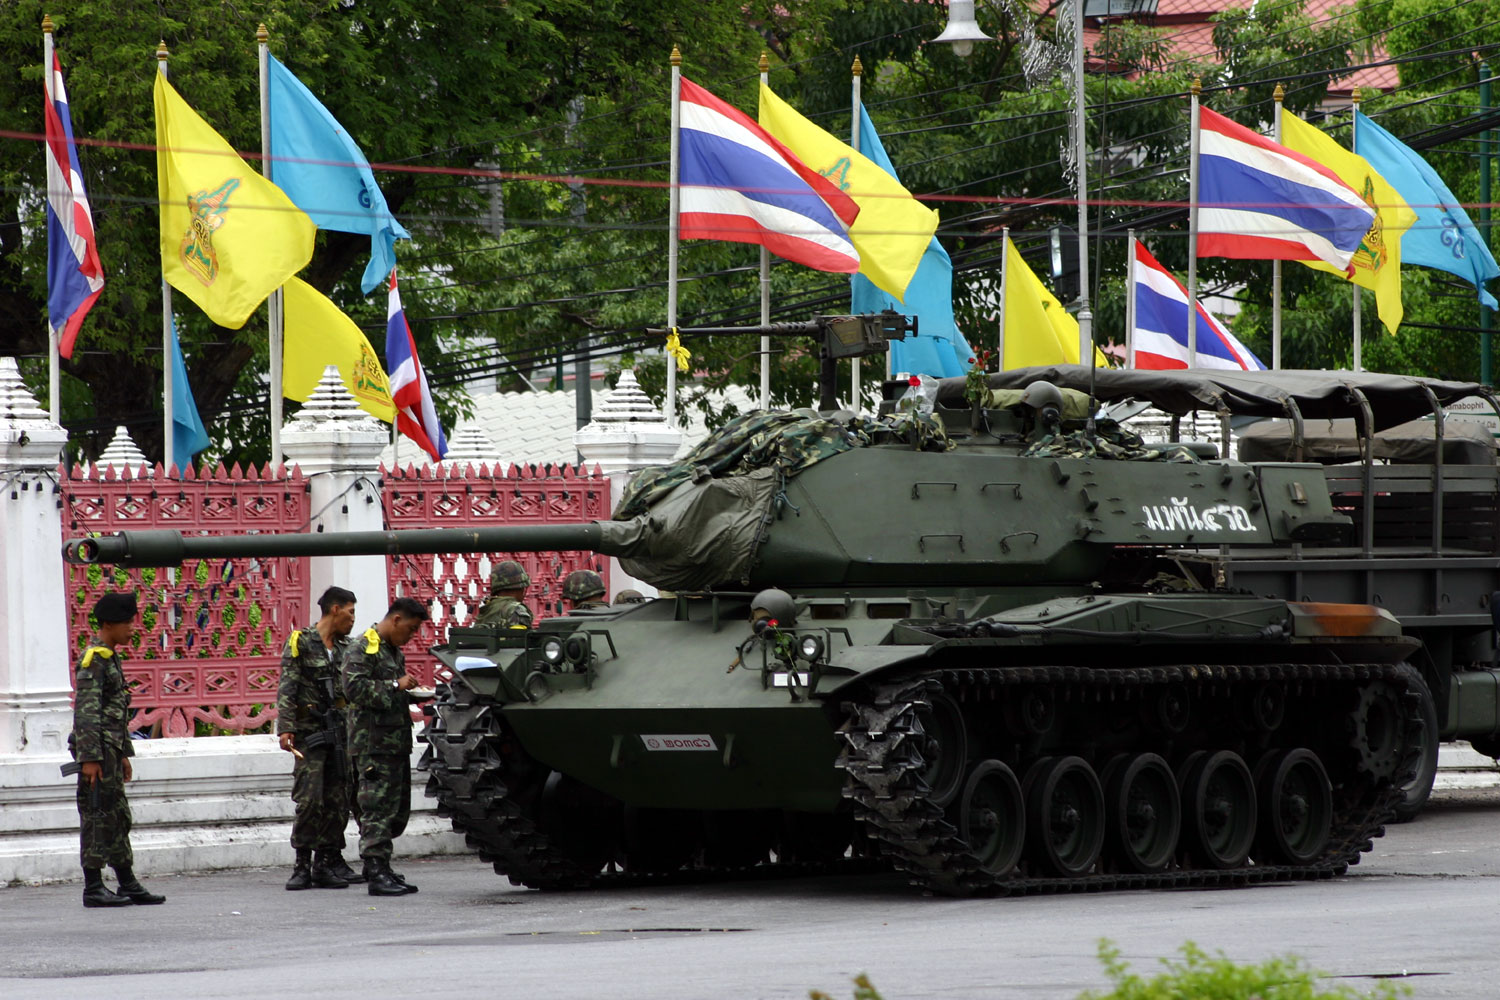 A tank parked in front of a government building after the 2006 coup. Note the yellow ribbons attached to the soldier’s uniforms and the machine gun barrel on the tank—a symbol of the PAD (yellow shirts) and the monarchy. These are largely the same forces leading the protests in Thailand today.